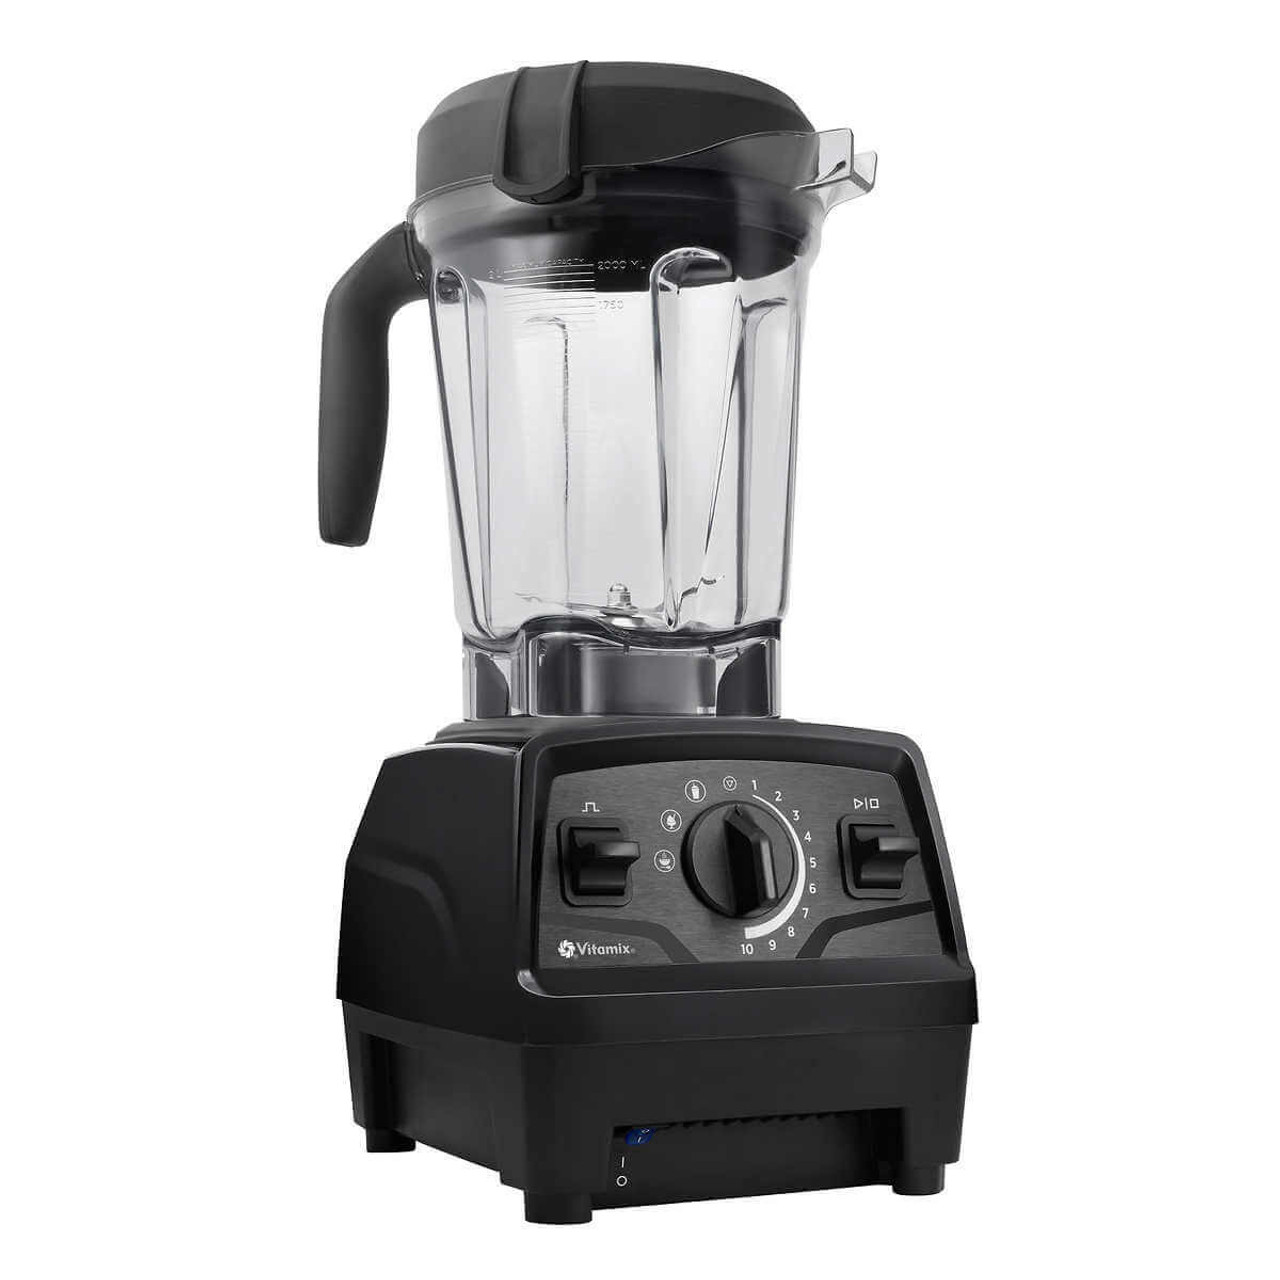 https://cdn11.bigcommerce.com/s-g5ygv2at8j/images/stencil/1280x1280/products/14512/28899/vitamix-explorian-e520-blender-with-tumblers__09528.1692704945.jpg?c=1